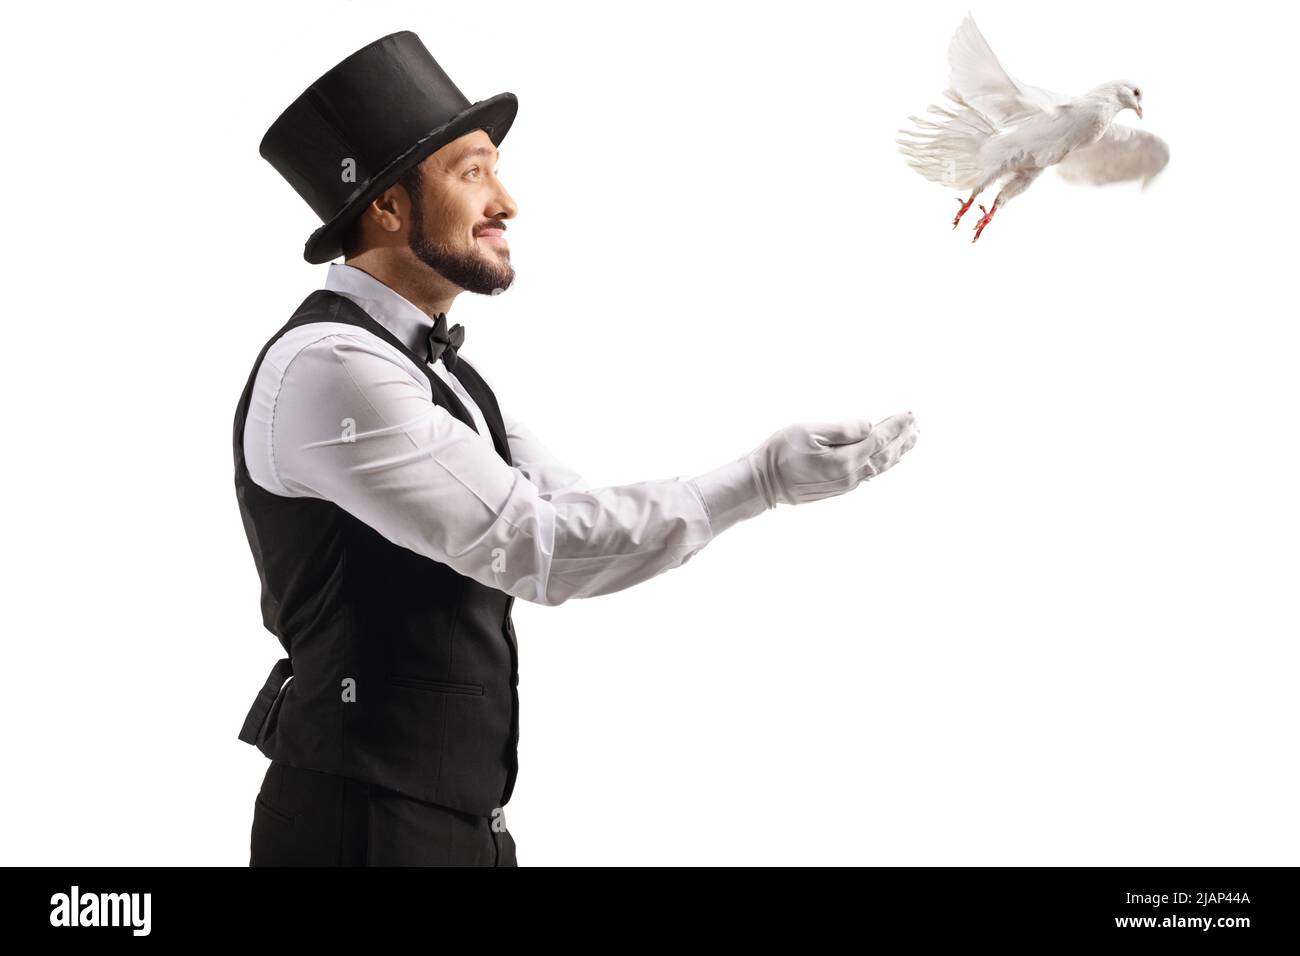 Magician letting a white dove fly from his hand isolated on white background Stock Photo